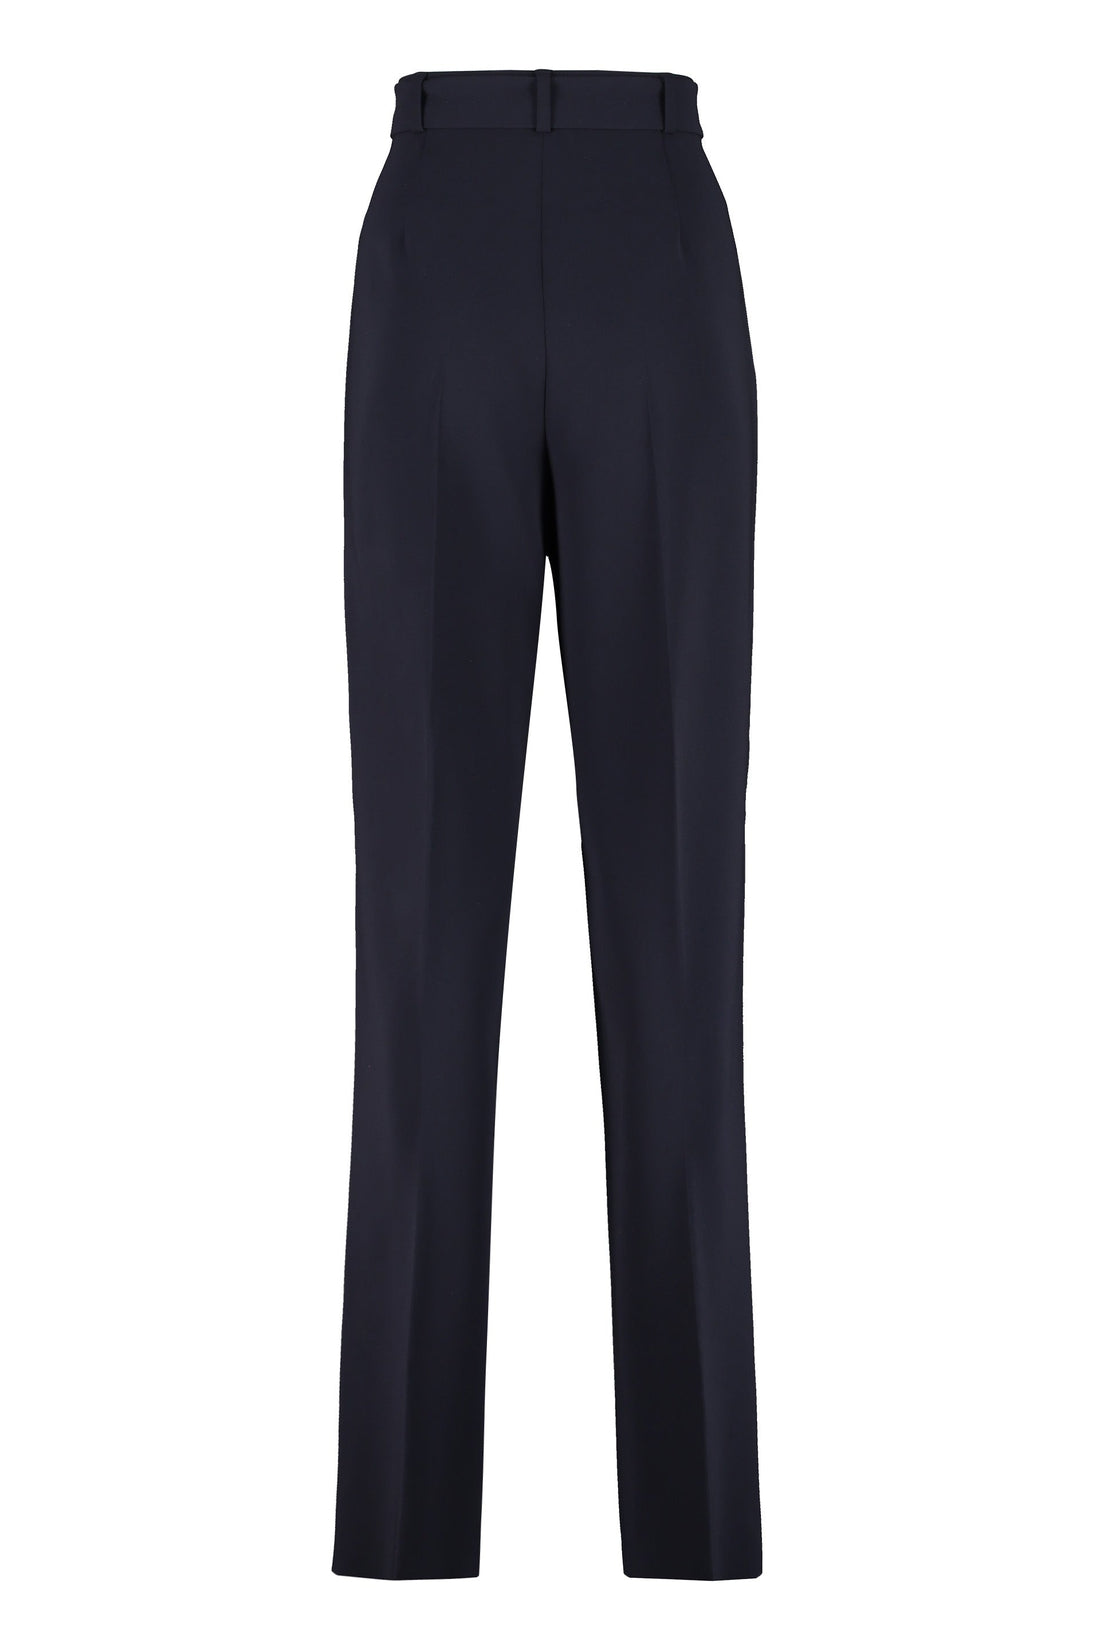 Max Mara-OUTLET-SALE-Fieno cady trousers-ARCHIVIST